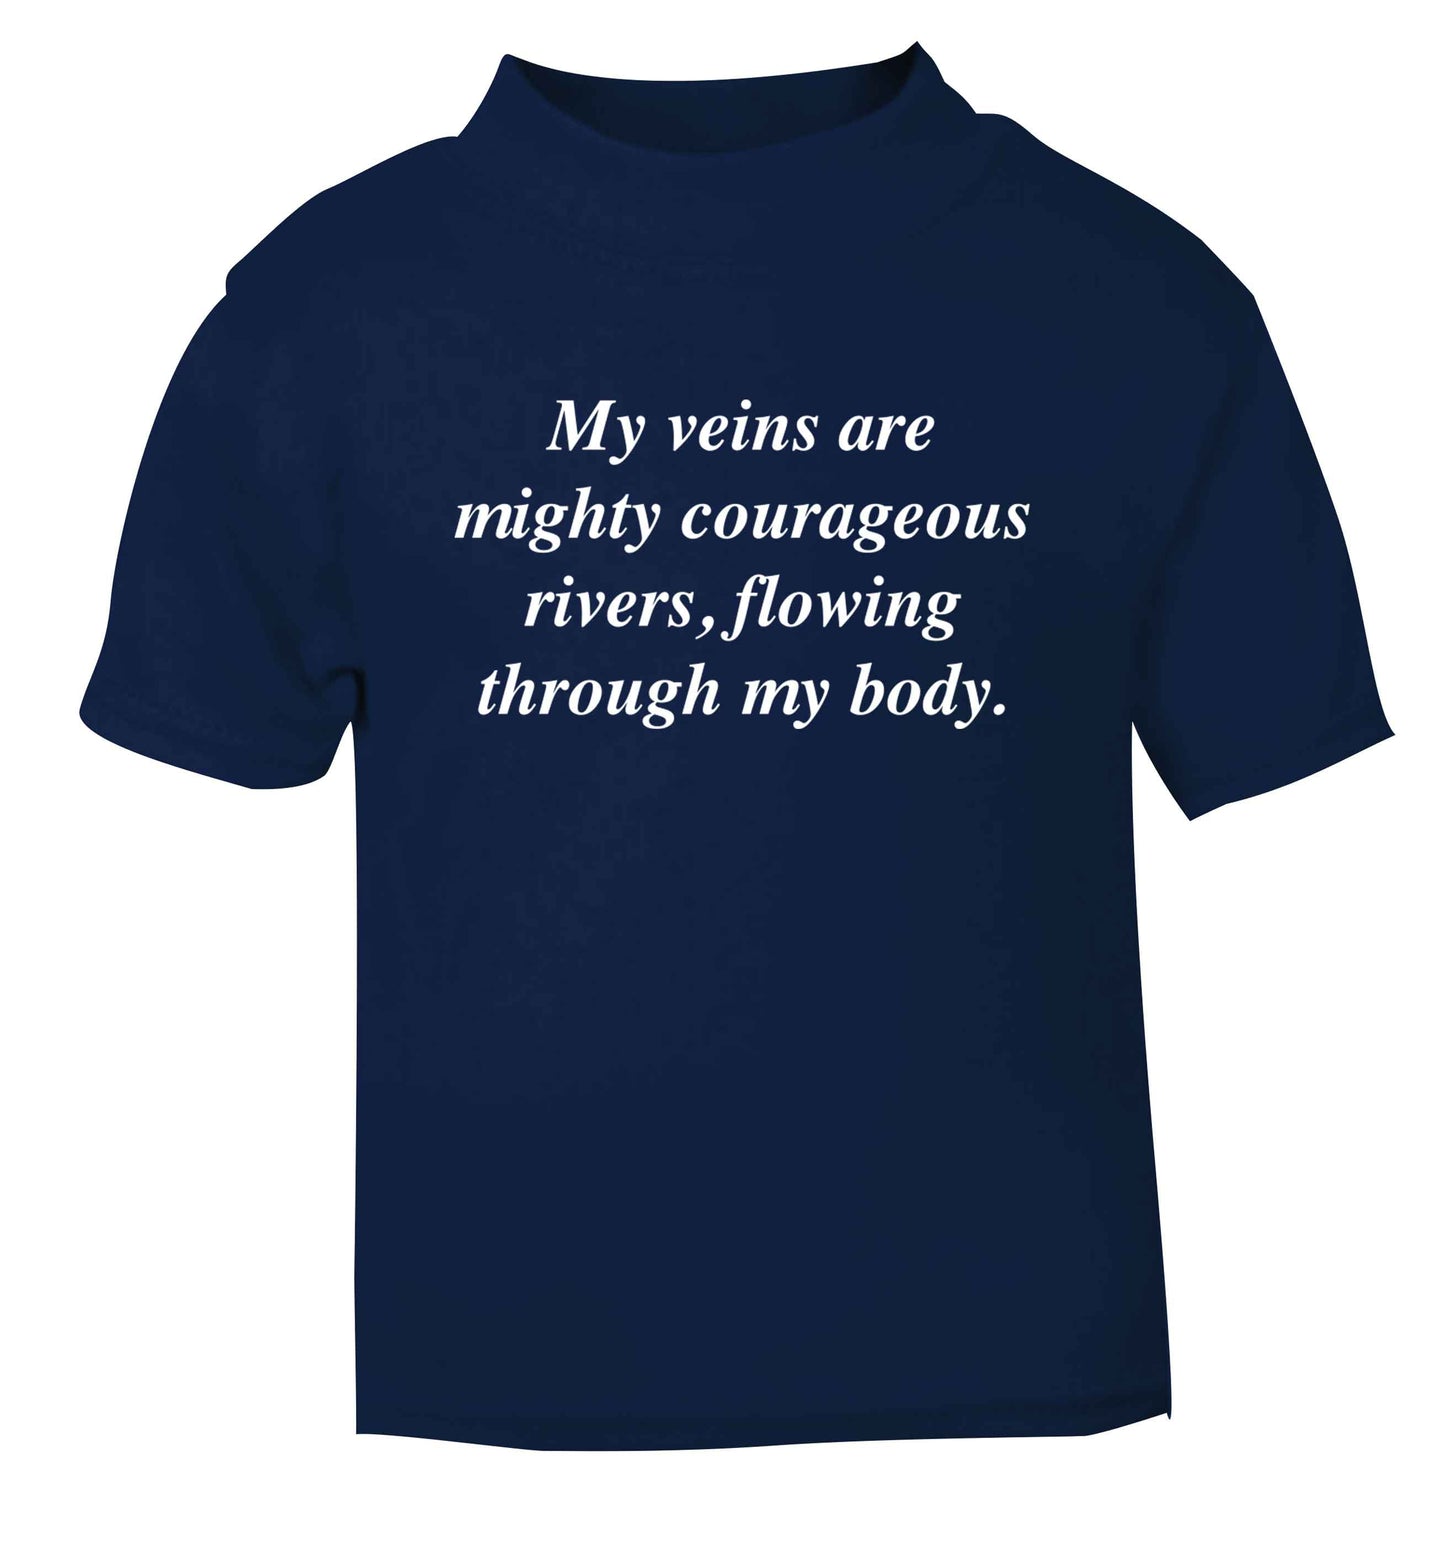 My veins are mighty courageous rivers, flowing through my body navy baby toddler Tshirt 2 Years